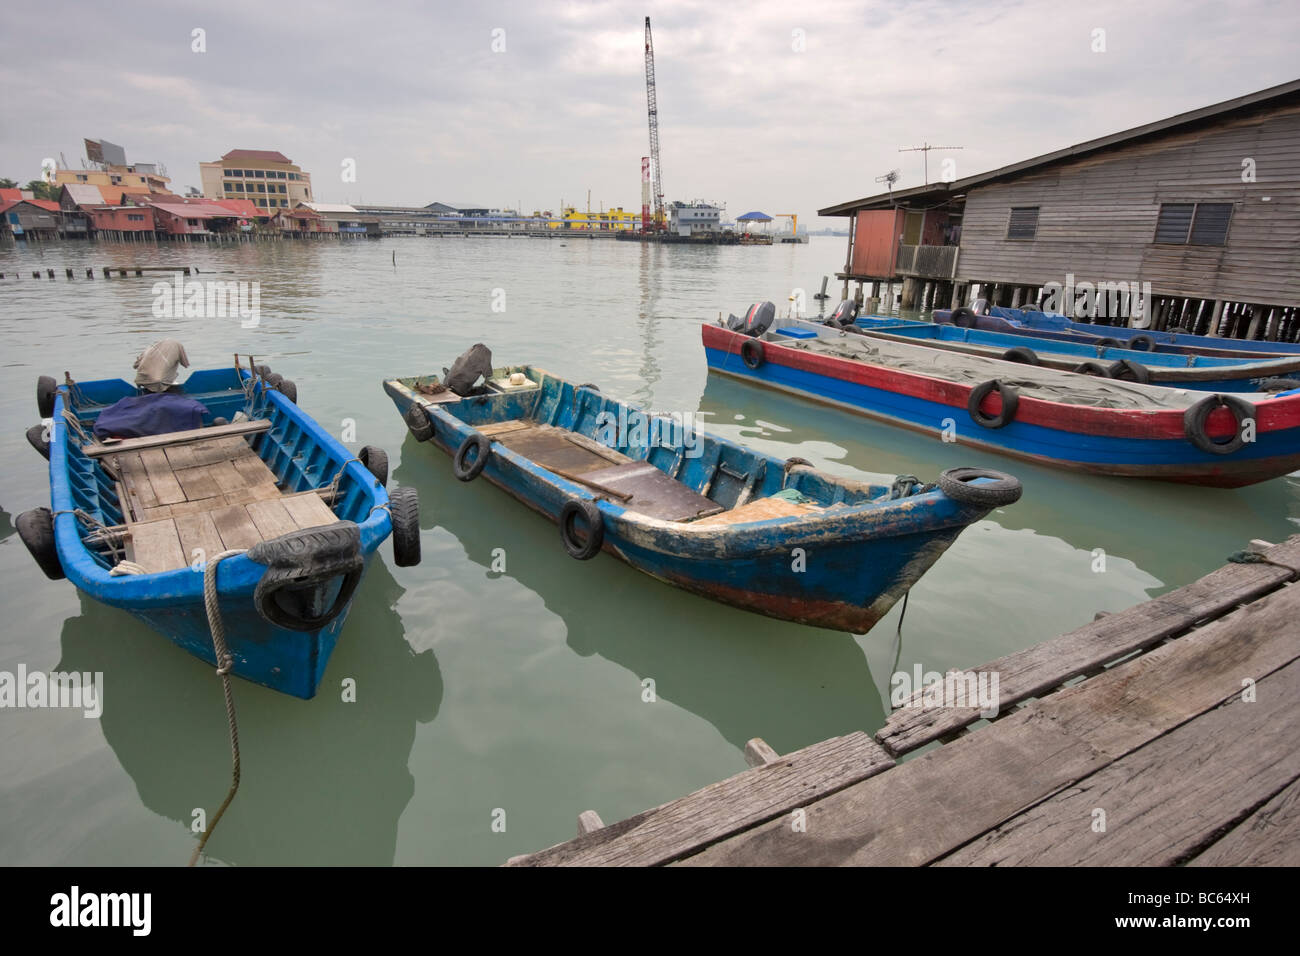 Angelboote/Fischerboote am Chew Jetty, Georgetown, Penang, Malaysia Stockfoto